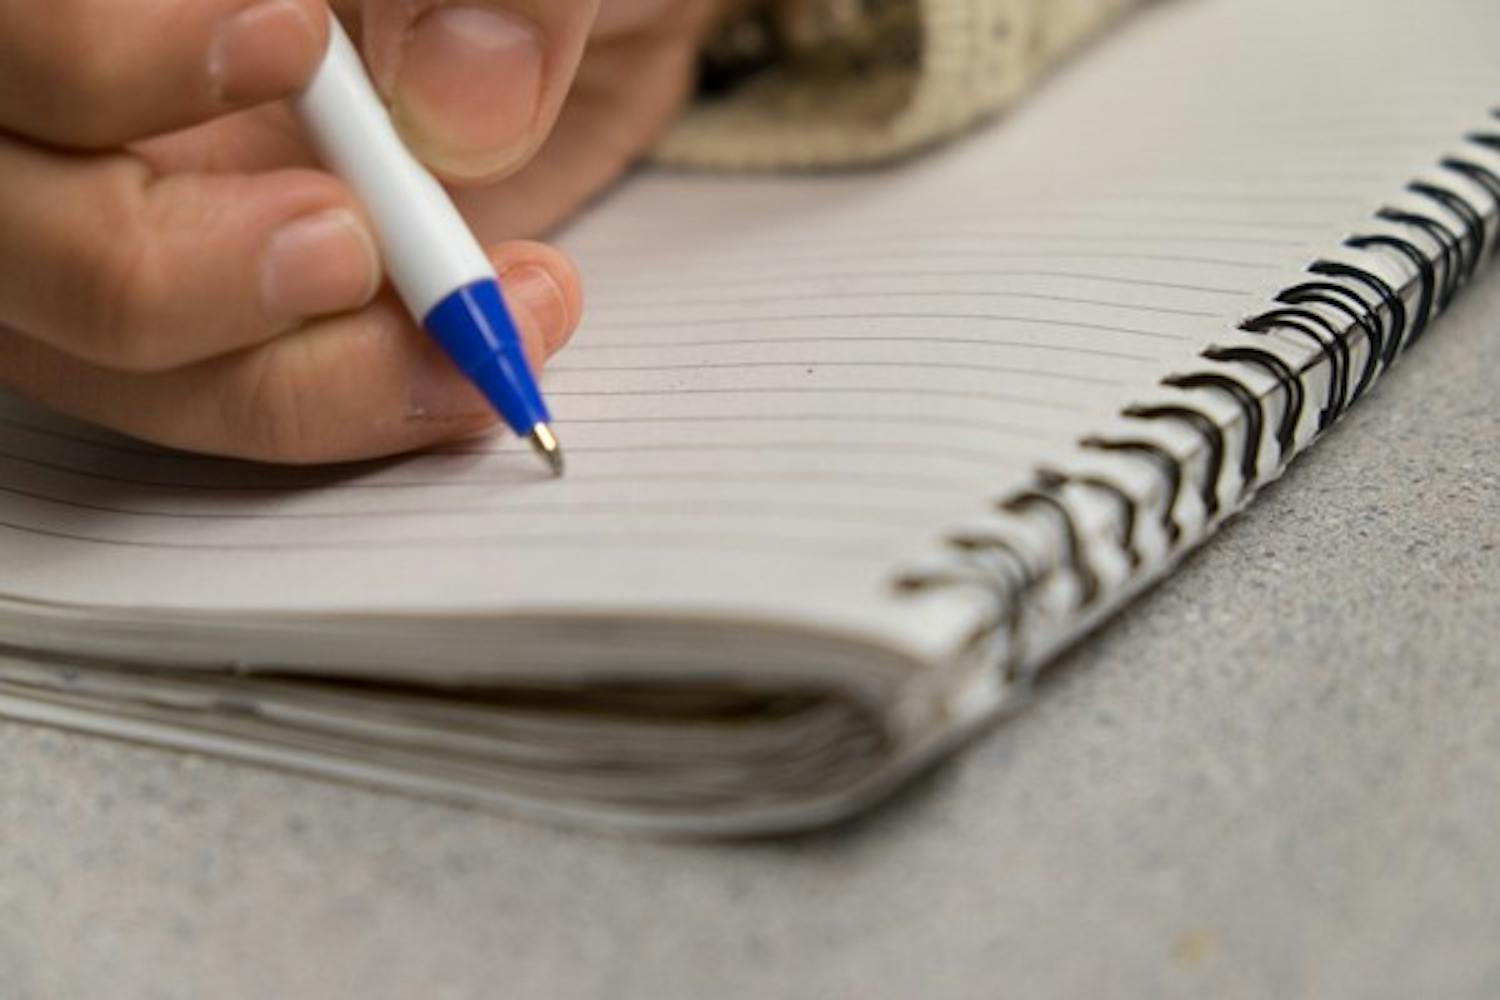 Numerous ASU professors are encouraging students to take handwritten notes in lieu of electronic notes. A study showed that students who write notes by hand do better on exams. (Photo illustration by Andrew Ybanez)